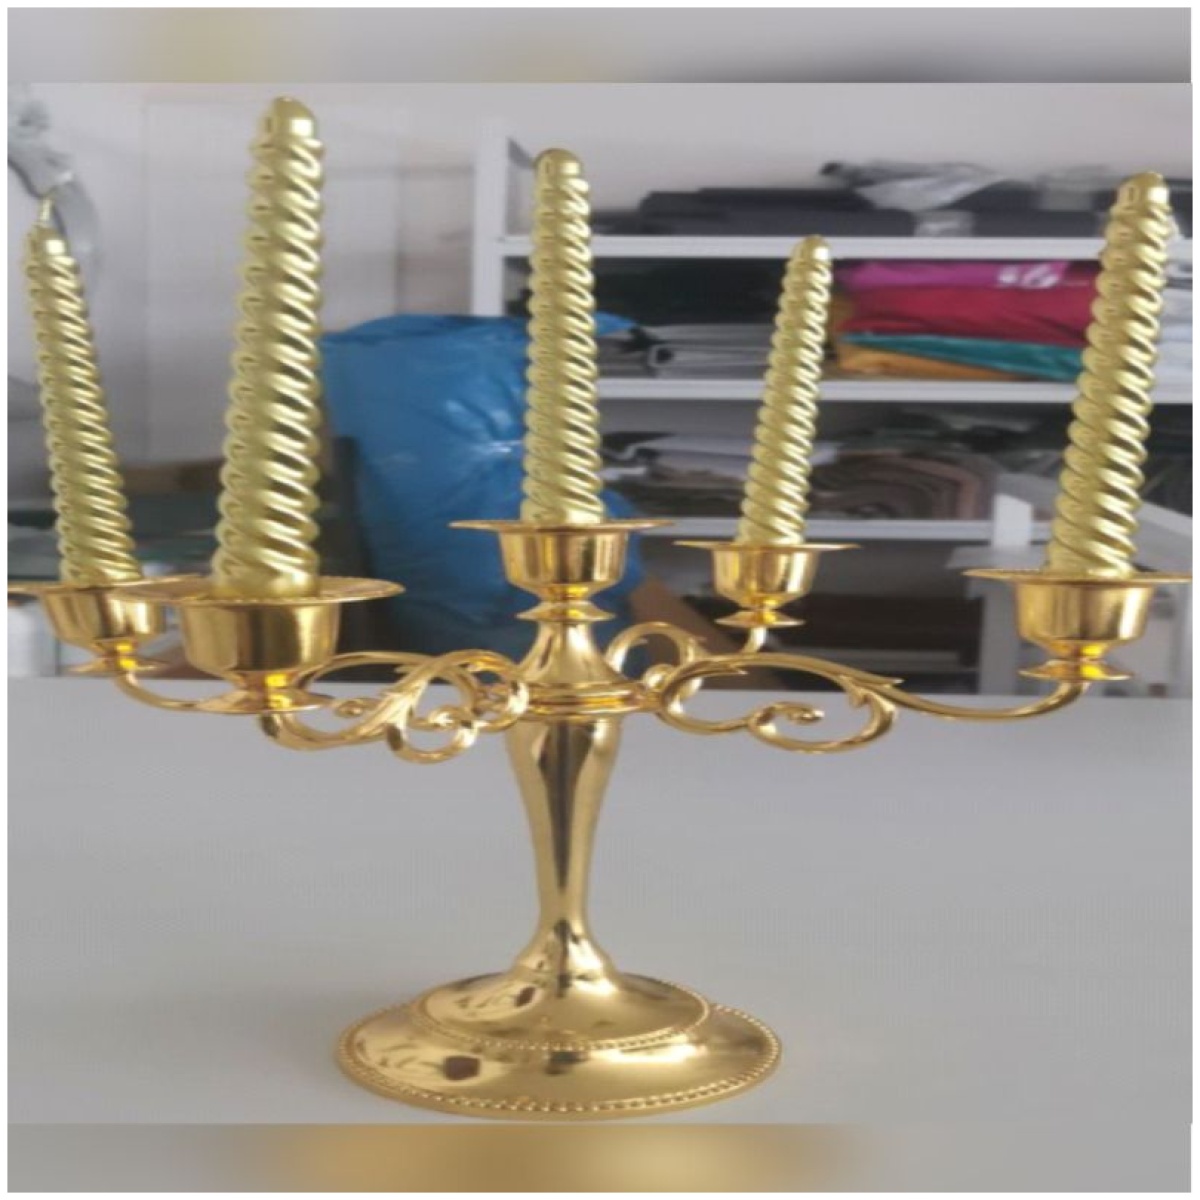 Five Candle Sticks Holder And Golden Candles (SPMYE3003)